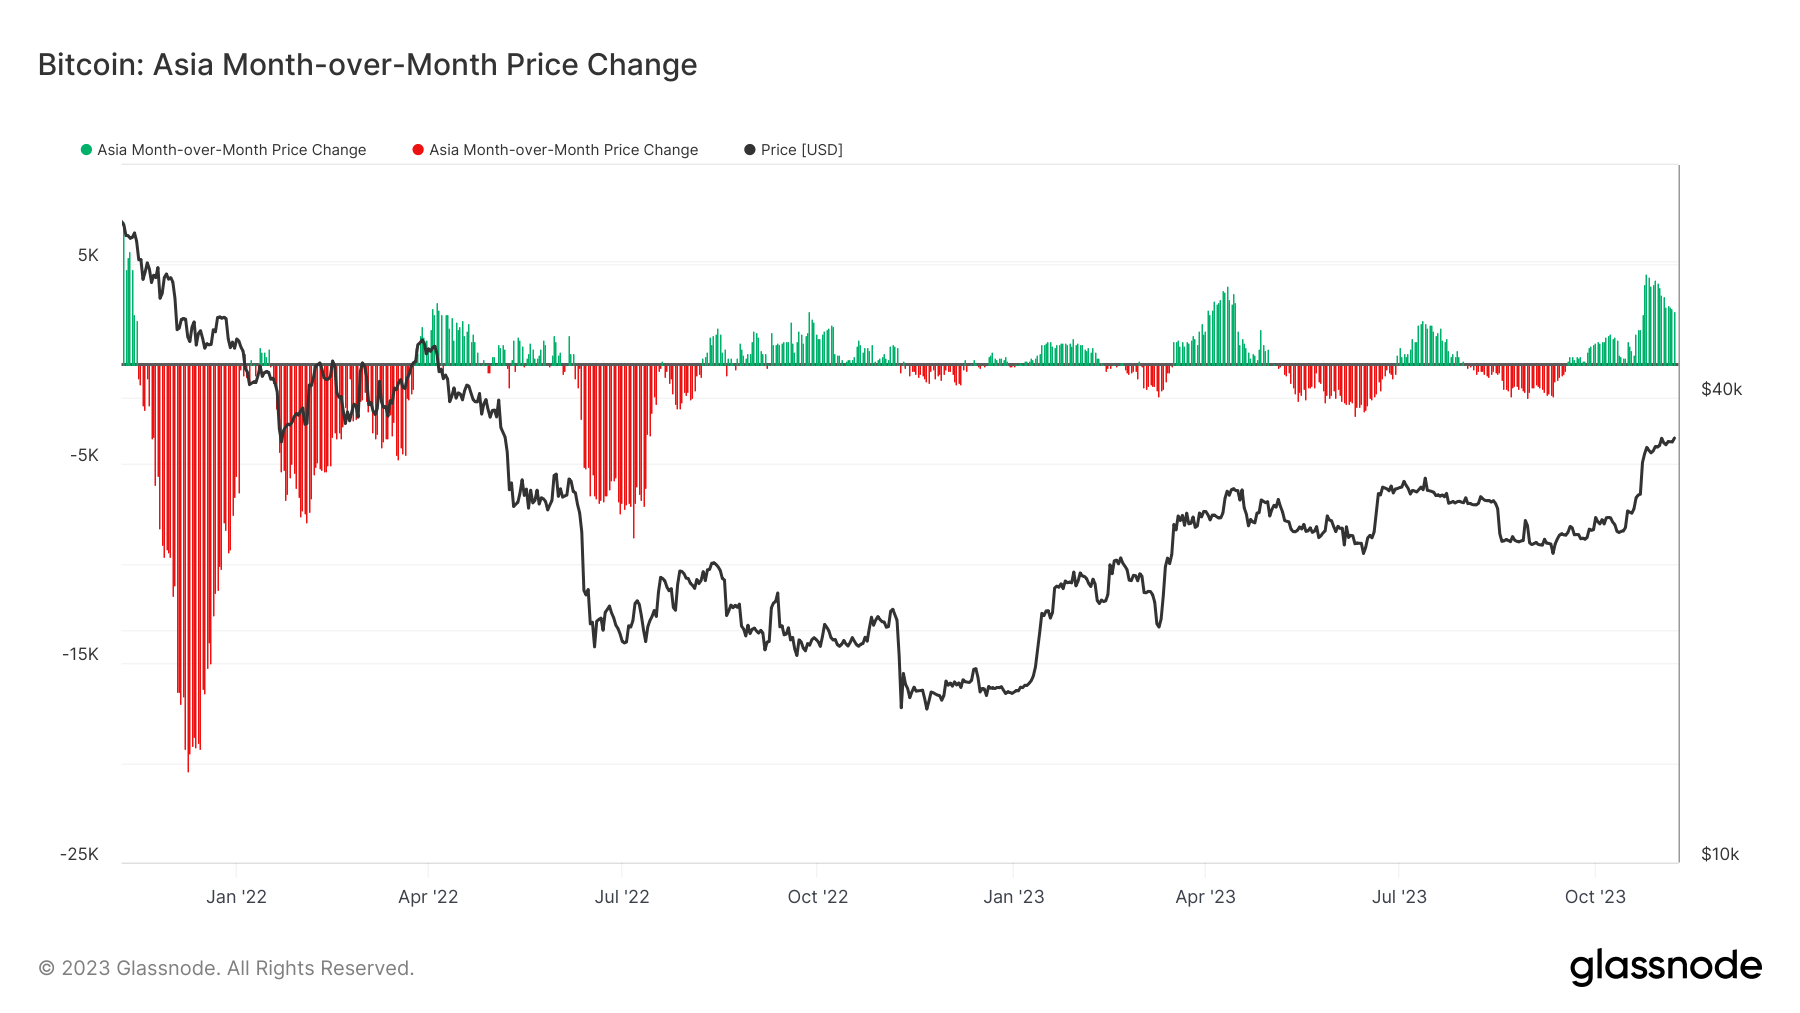 Asia Month over Moth Price Change: (Source: Glassnode)